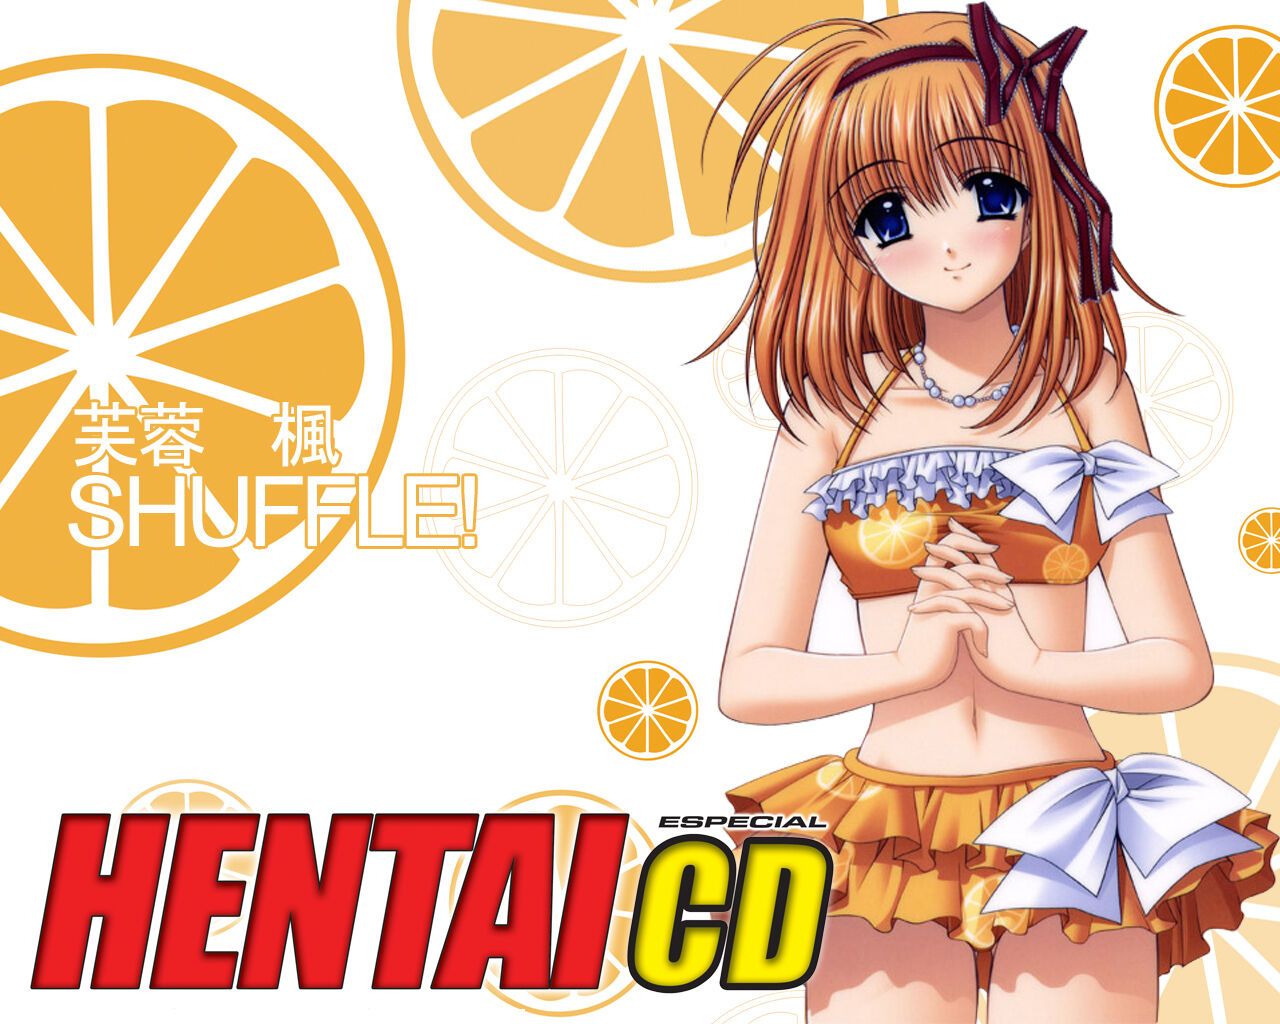 Hentai CD RIP - All wallpapers Update v1 18